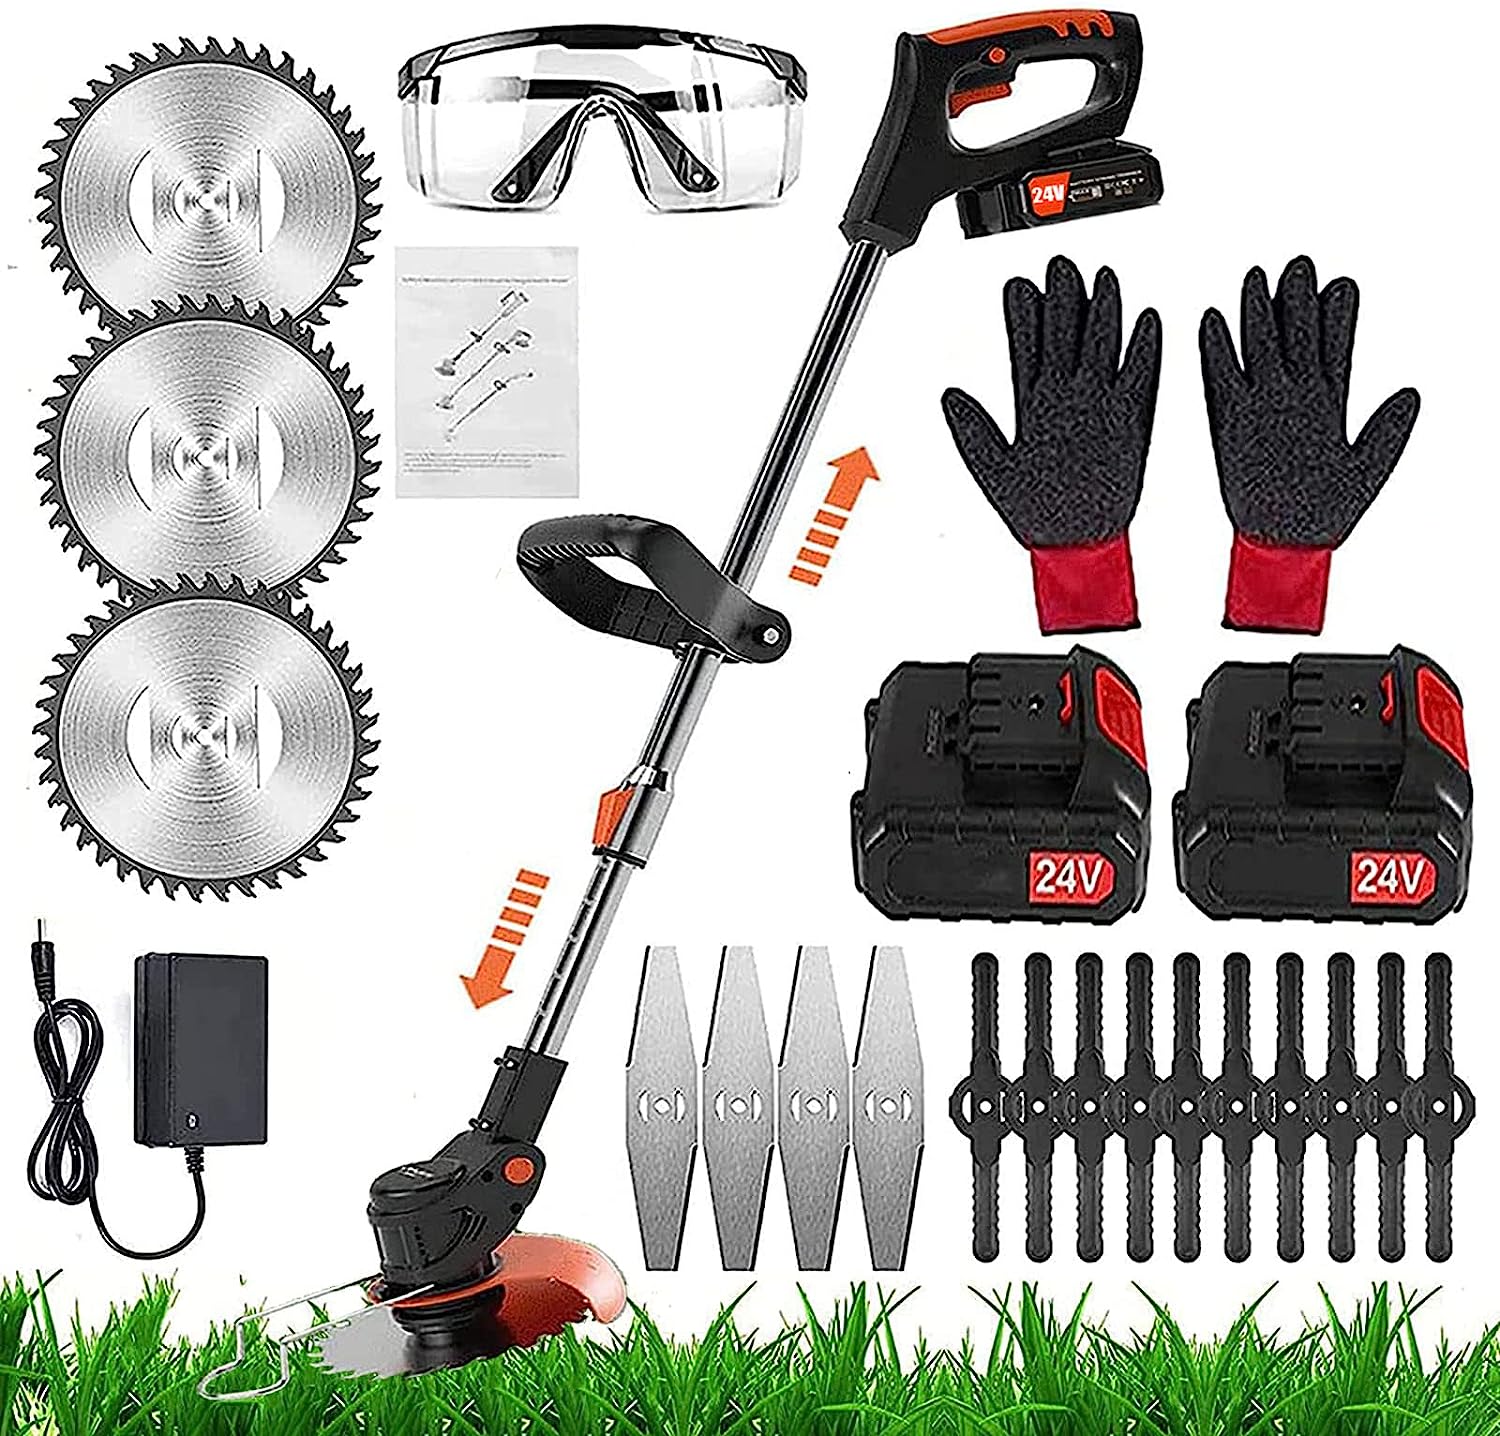 Weed Wacker Cordless Weed Trimmer Lawn Trimmer [...]